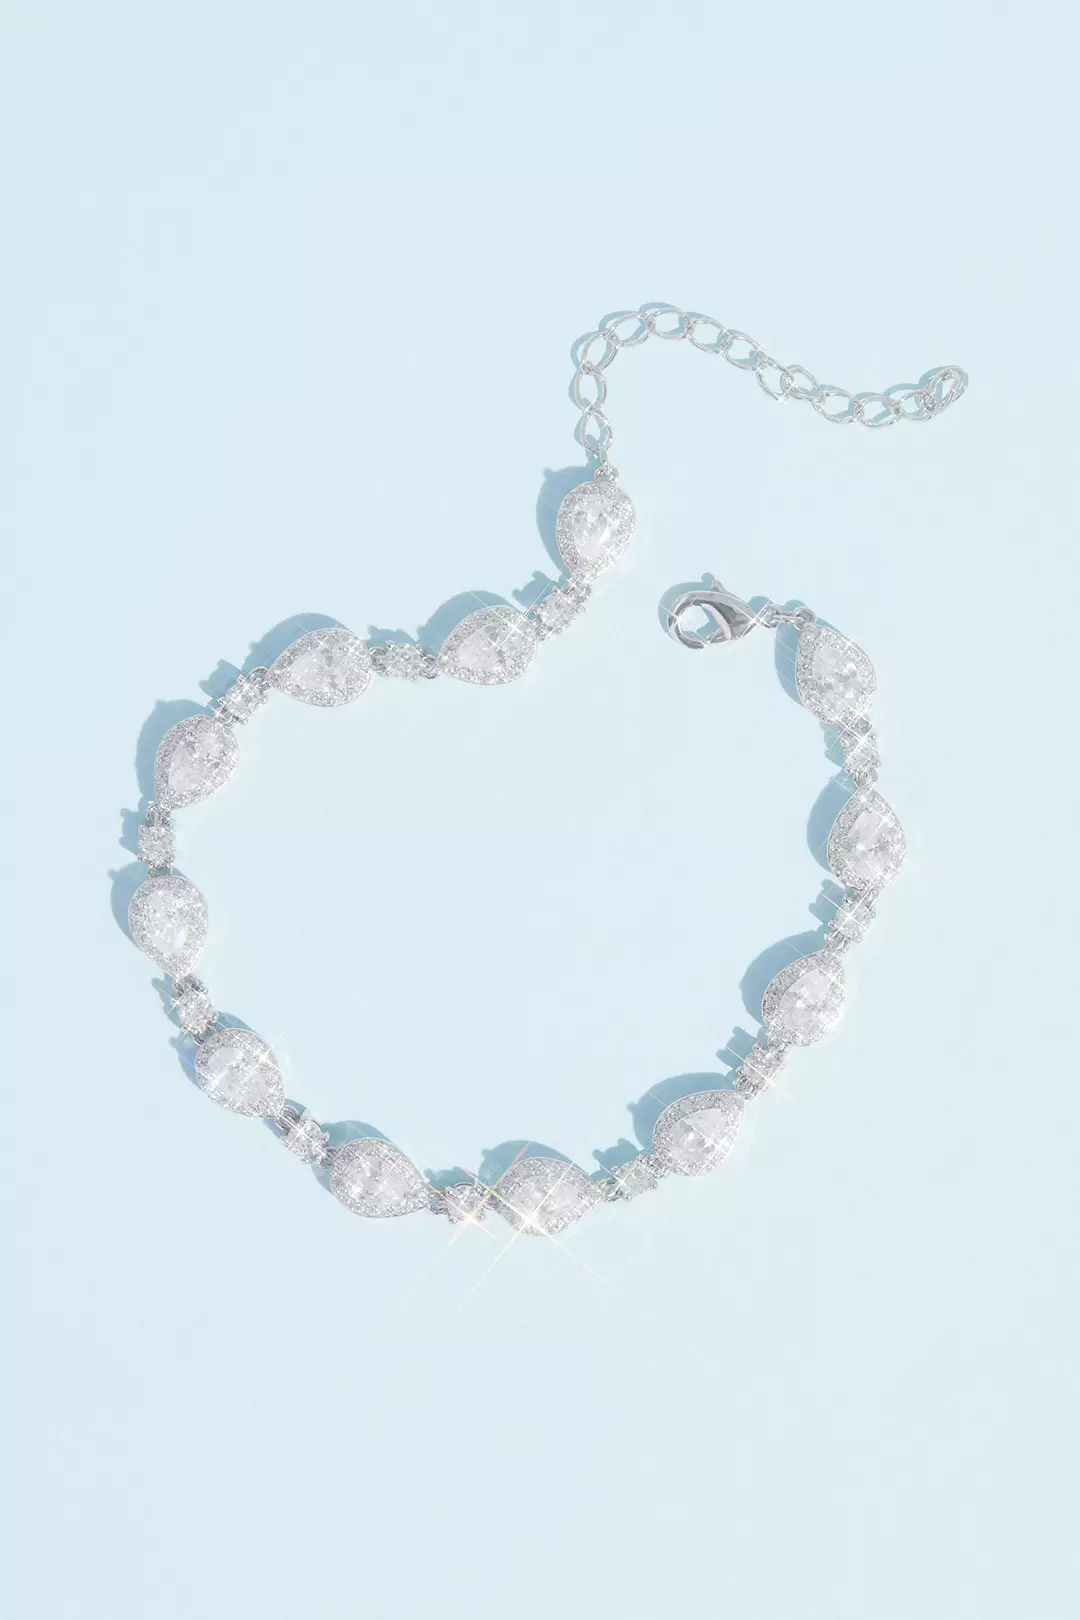 Haloed Teardrop and Solitaire Crystal Bracelet Image